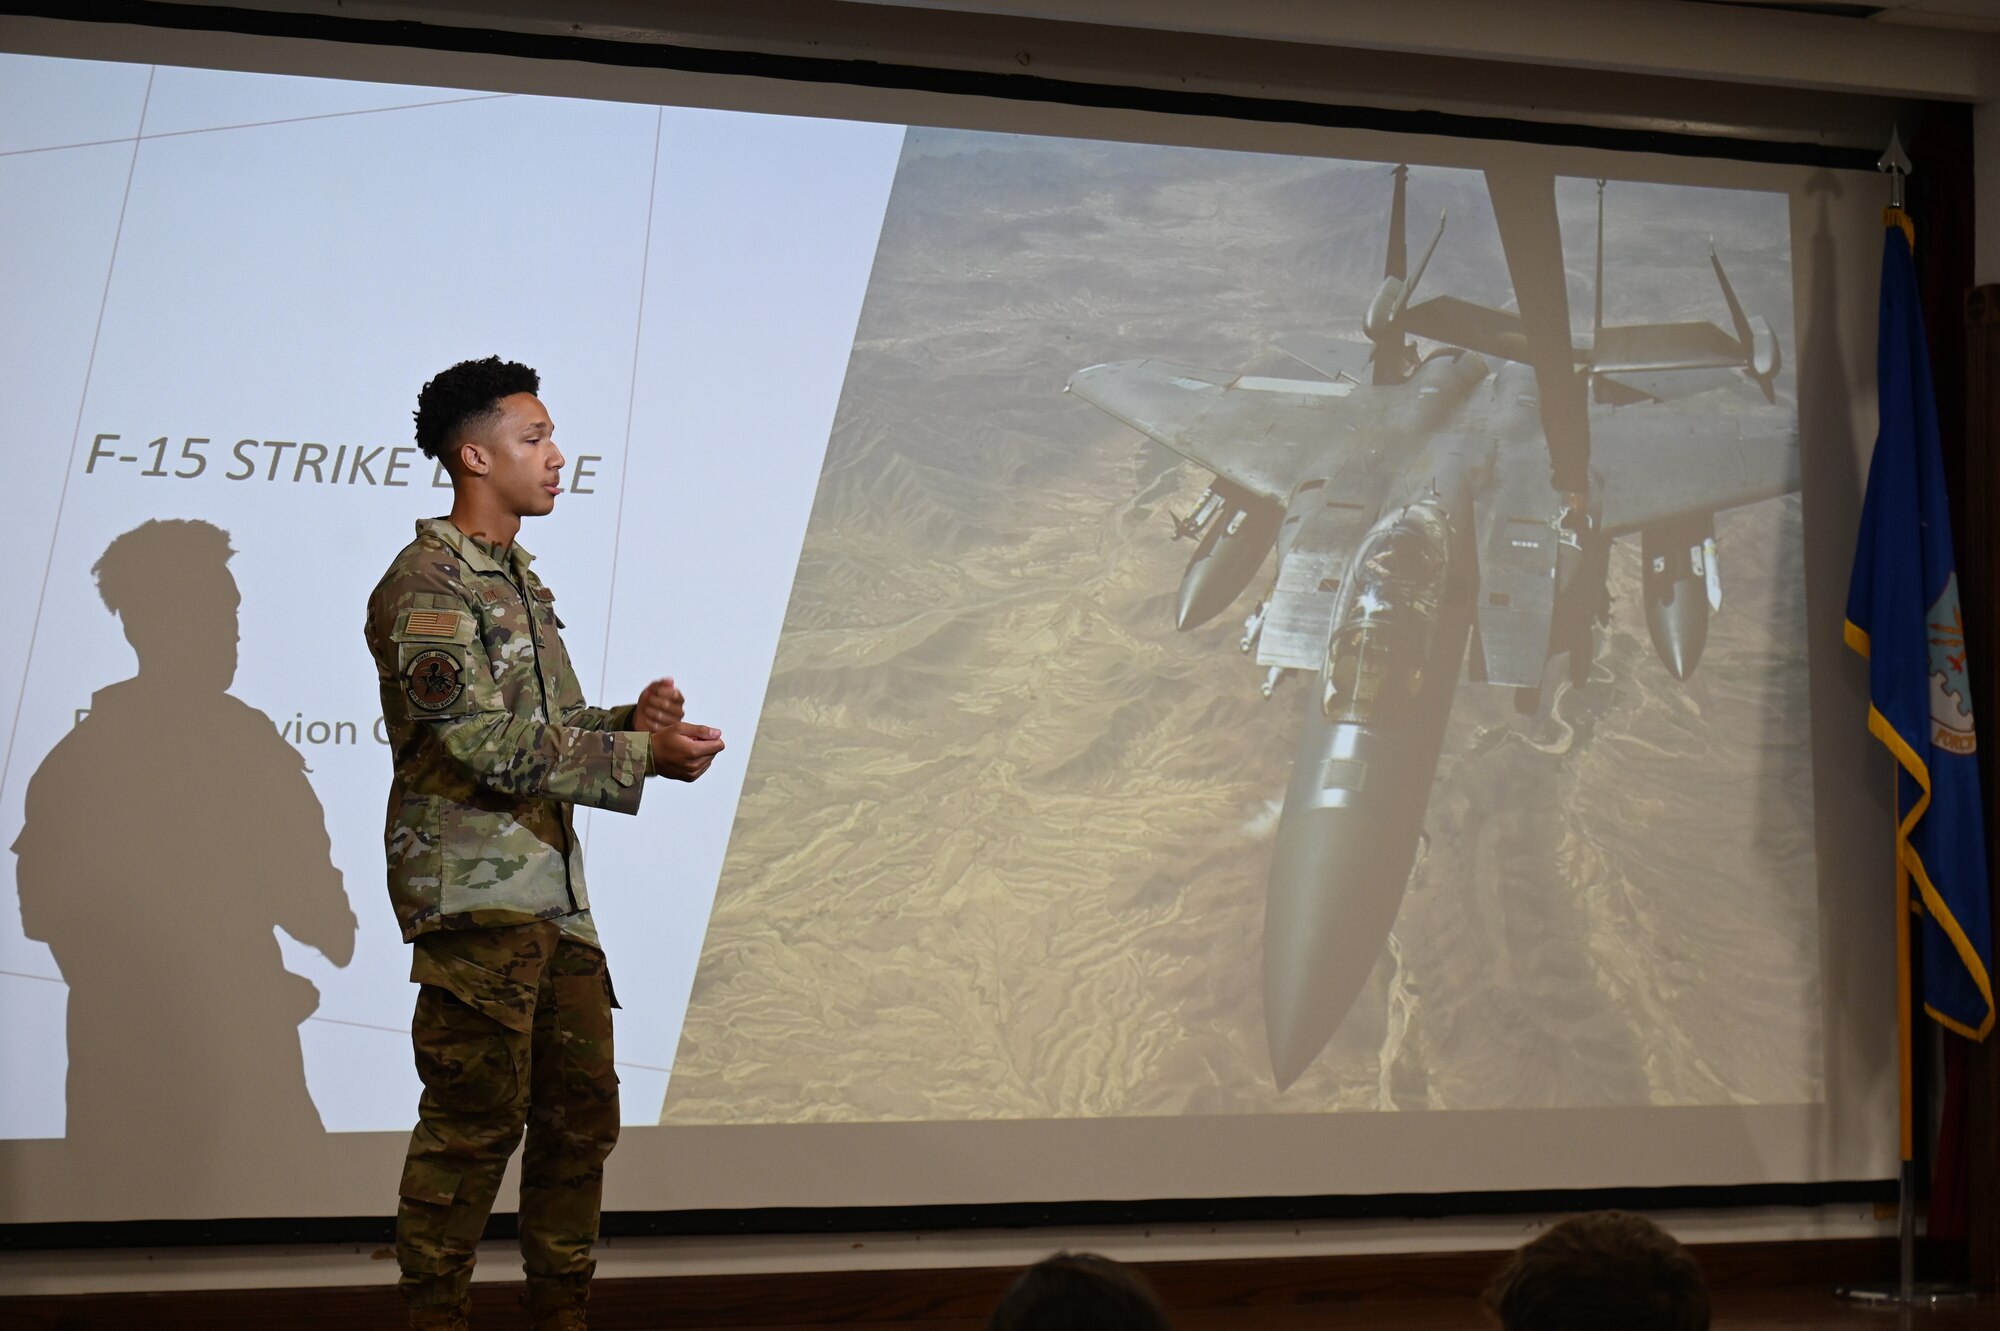 U.S. Air Force Senior Airman Tavion Cox, 87th Electronic Warfare Squadron Combat Shield avionics journeyman, briefs on the maintenance of the F-15E Strike Eagle to Pensacola High School Air Force JROTC cadets during a wing tour at Eglin Air Force, Fla., Nov. 1, 2023. The 87th EWS conducts the Combat Shield mission, which assesses defensive system readiness of Combat Air Forces (CAF) aircraft by deploying assessment teams with specialized equipment to provide senior leadership an independent assessment of the over health of CAF systems. (U.S. Air Force photo by Capt. Benjamin Aronson)